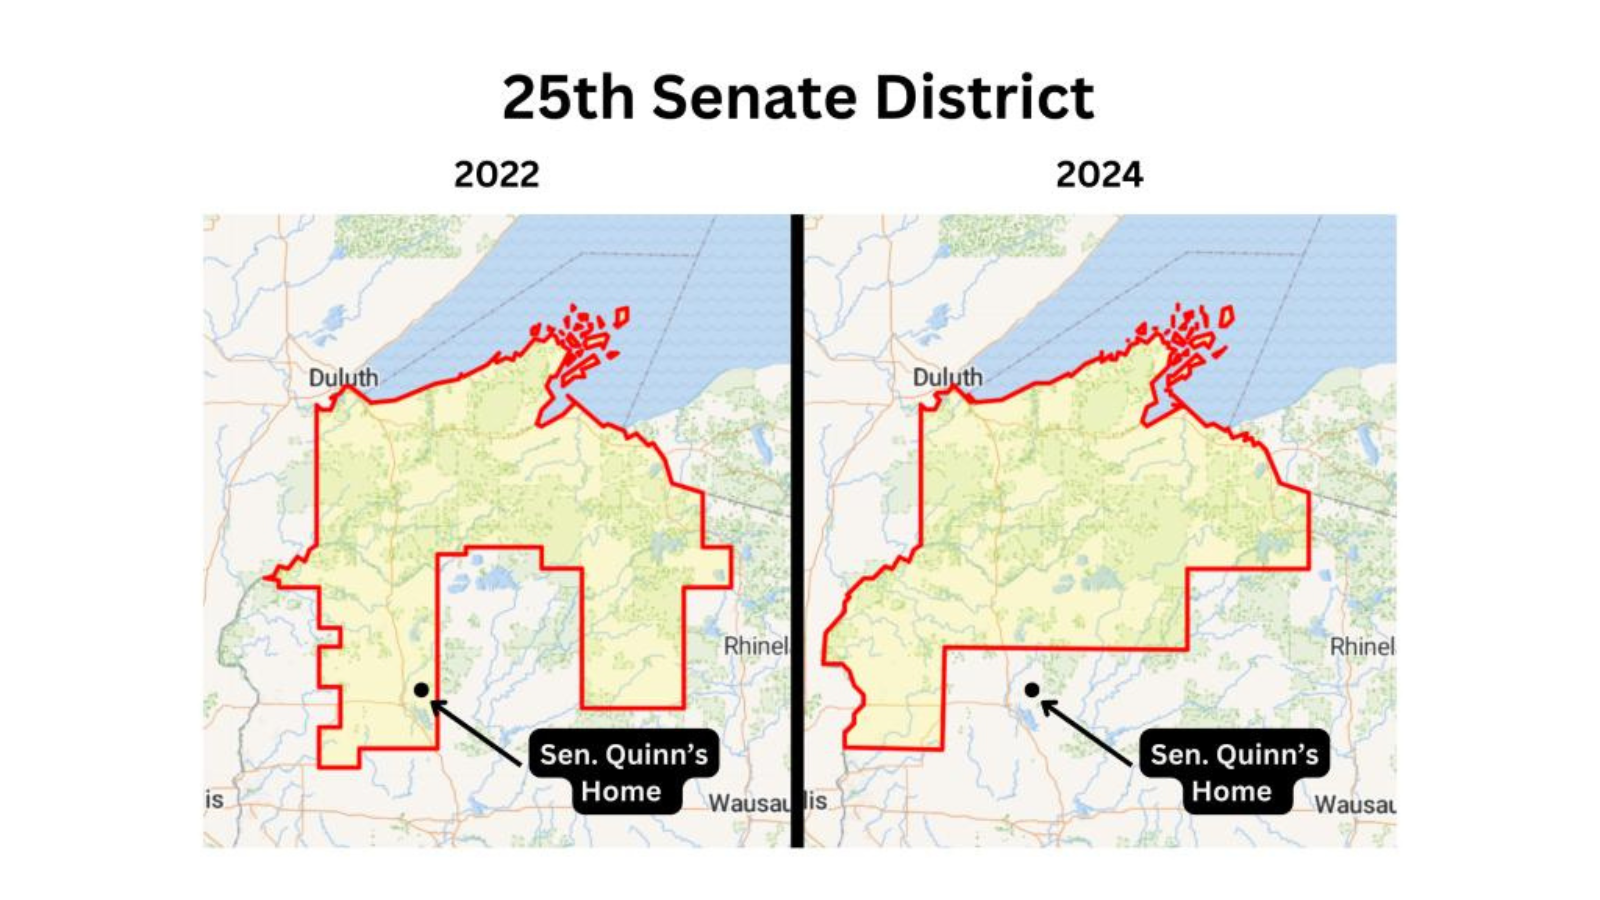 New legislative districts in NW Wisconsin give Dems a better chance in 2024, experts say